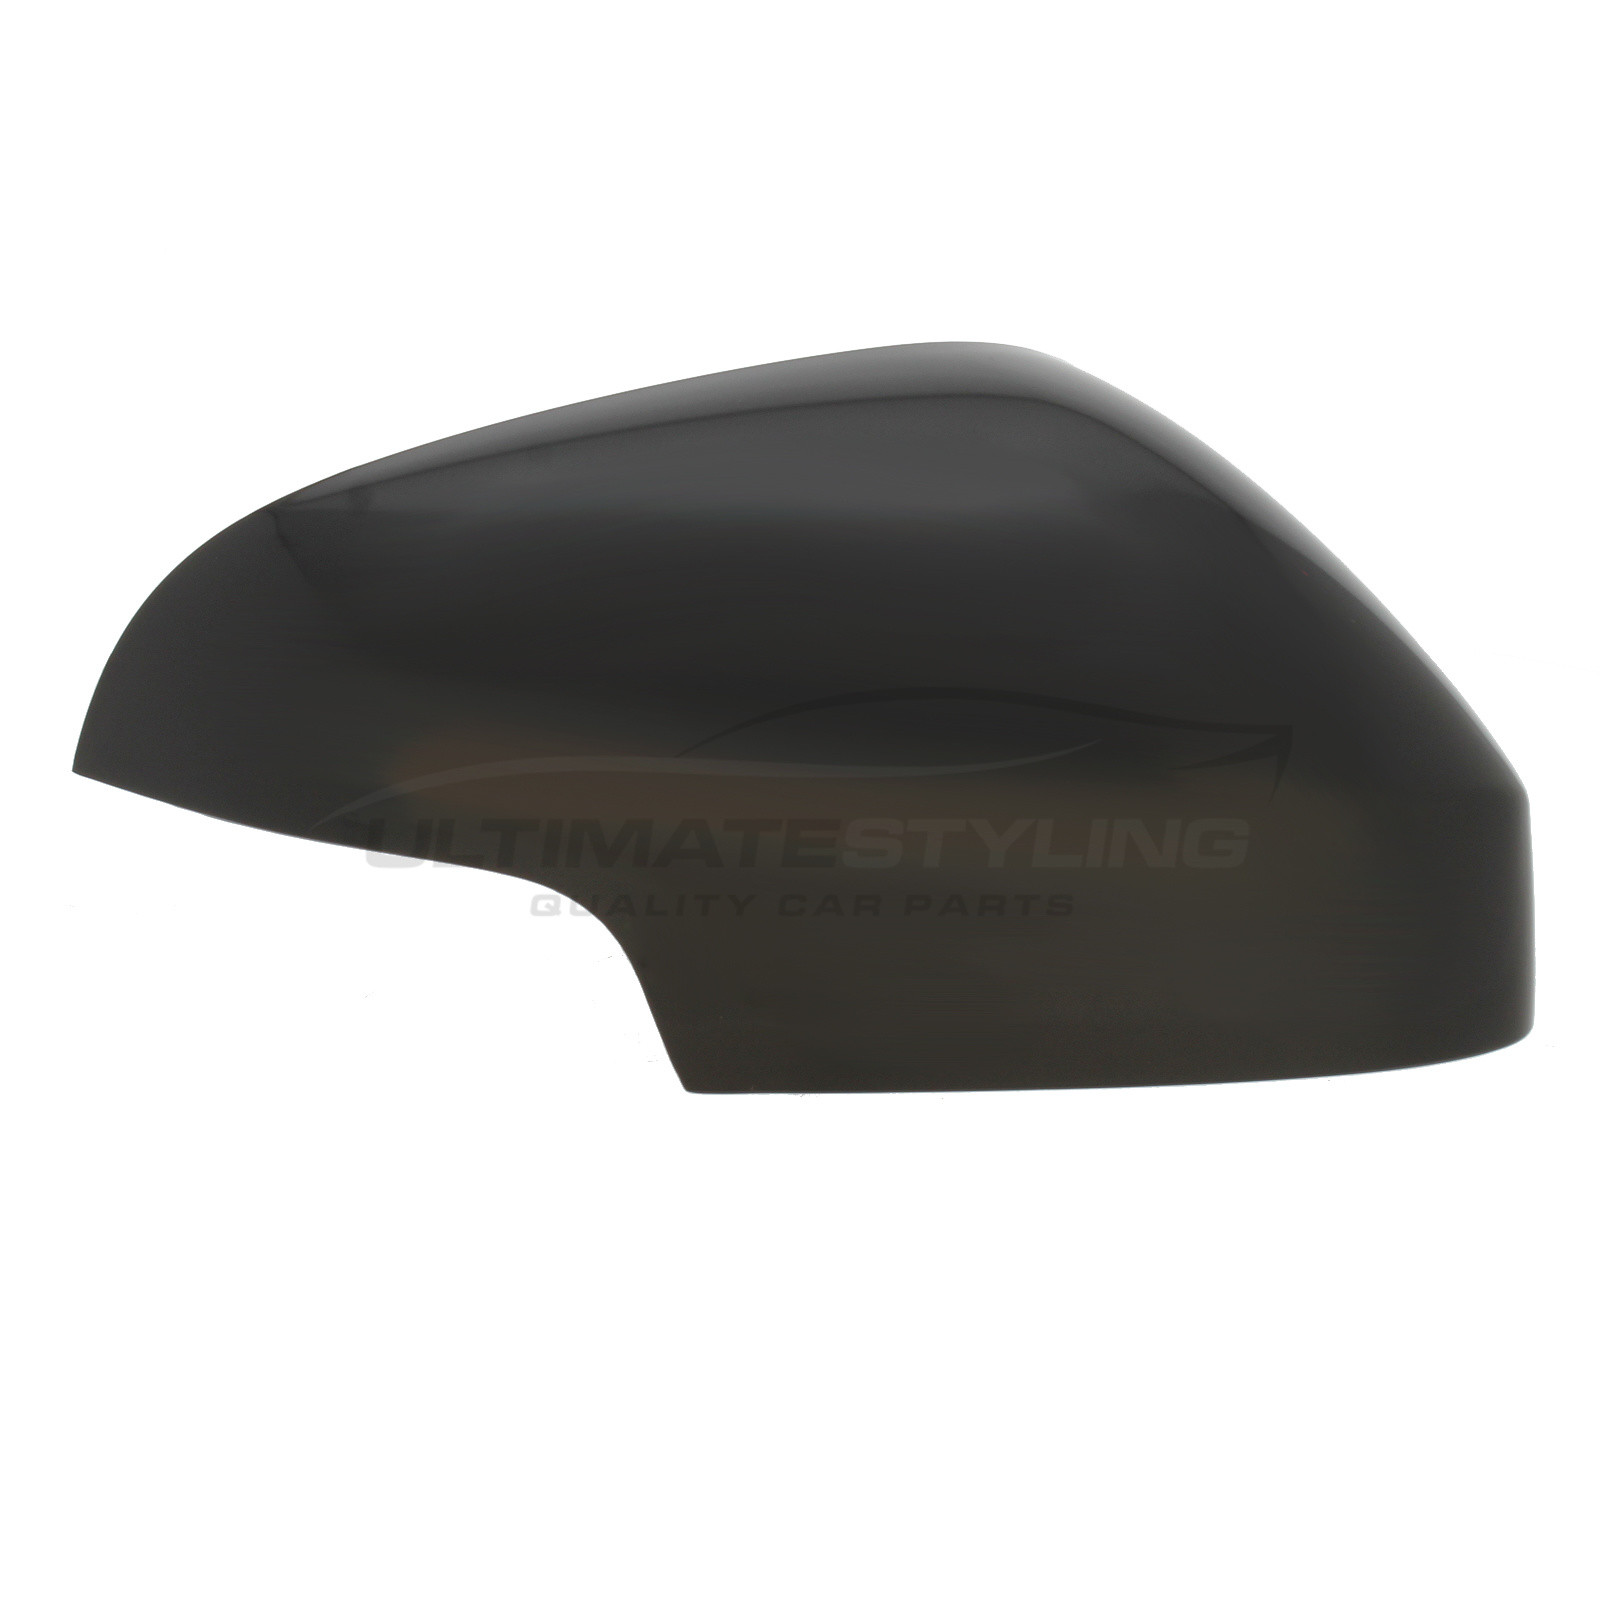 Volvo C30 2006-2014, Volvo C70 2006-2014, Volvo S40 2004-2013, Volvo V50 2004-2013 Wing Mirror Cover Cap Casing Black, Suitable for Painting Drivers Side (RH)